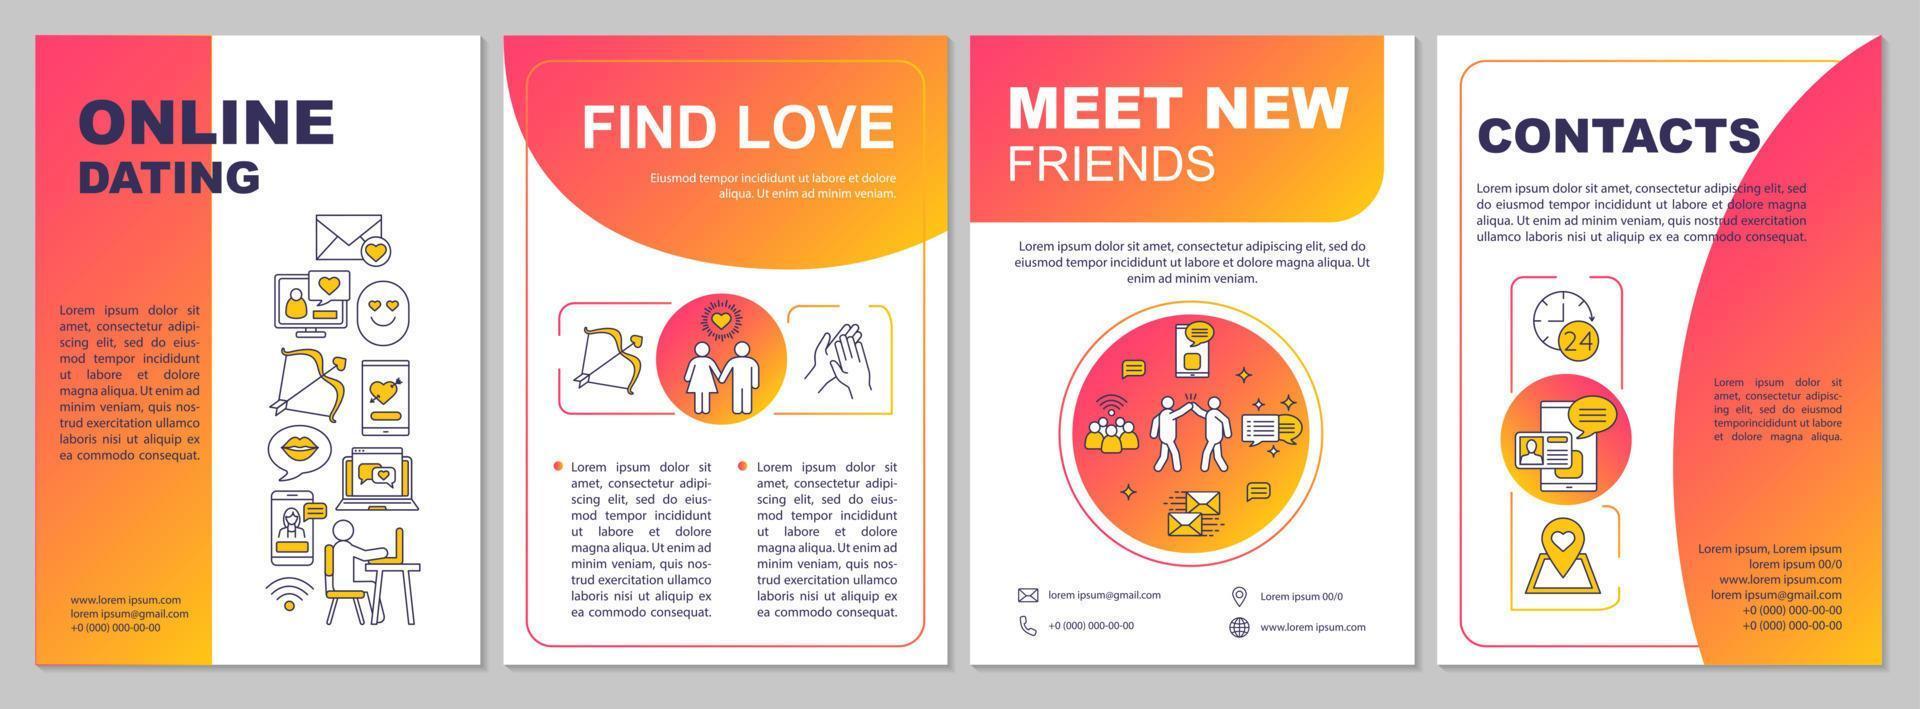 Online dating app brochure template layout. Find love idea. Flyer, booklet, leaflet print design with linear illustrations. Vector page layouts for magazines, annual reports, advertising posters